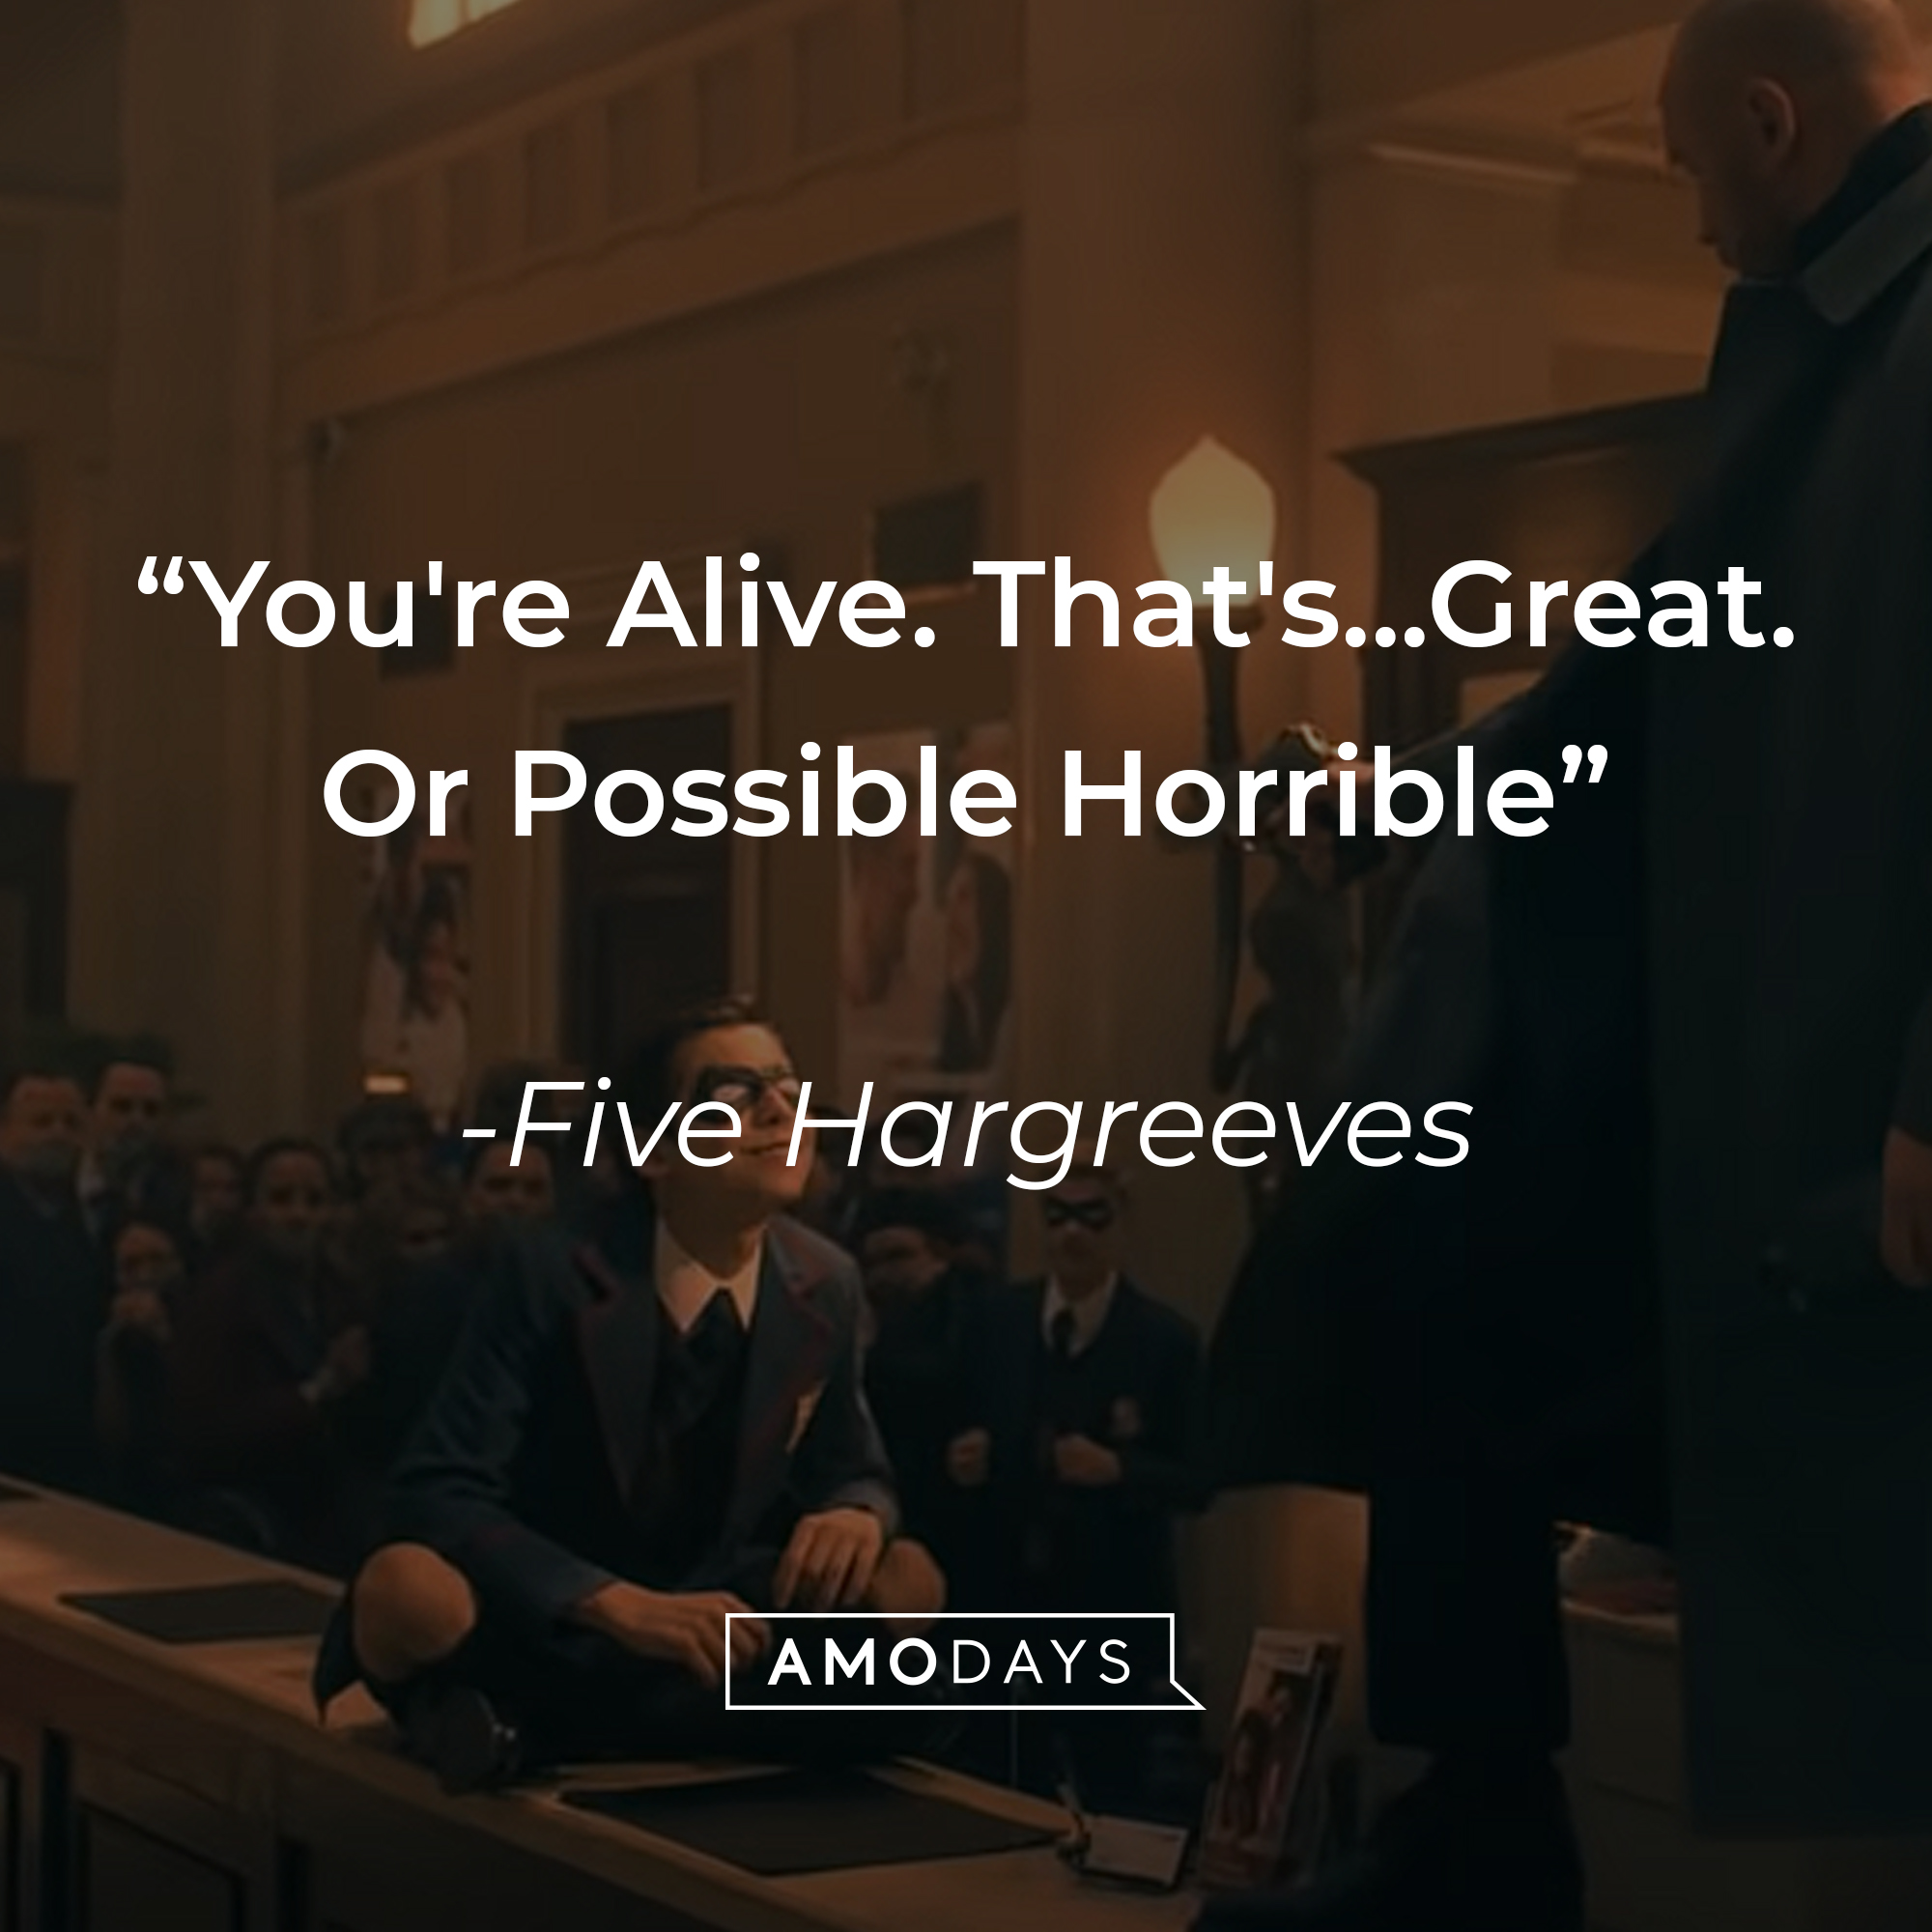 Five Hargreeves’ quote: “You're Alive. That's...Great. Or Possible Horrible” | Source: youtube.com/Netflix